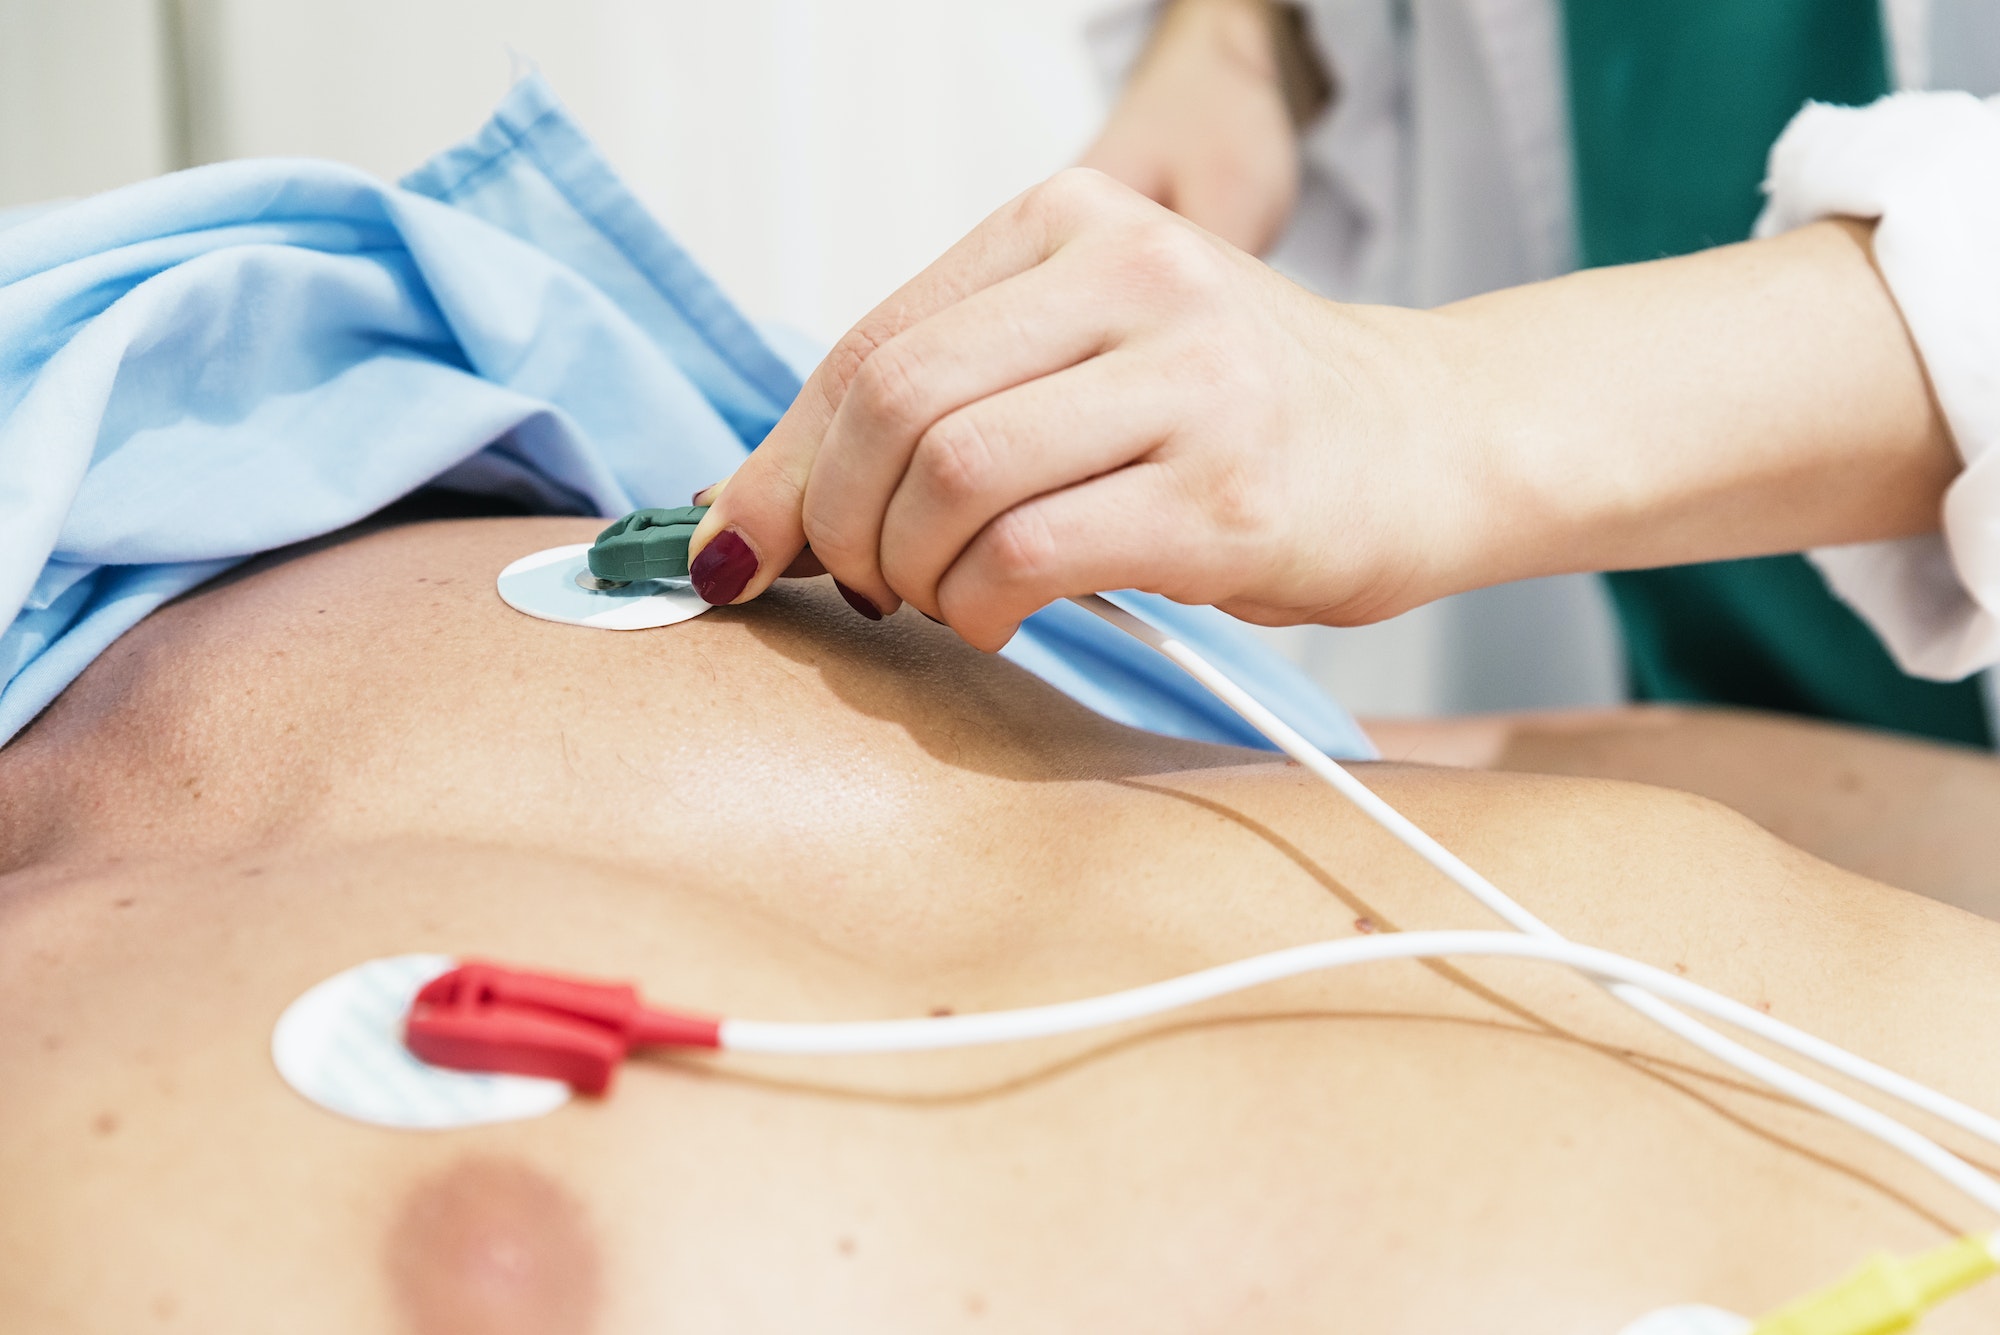 ECG electrodes on the patient